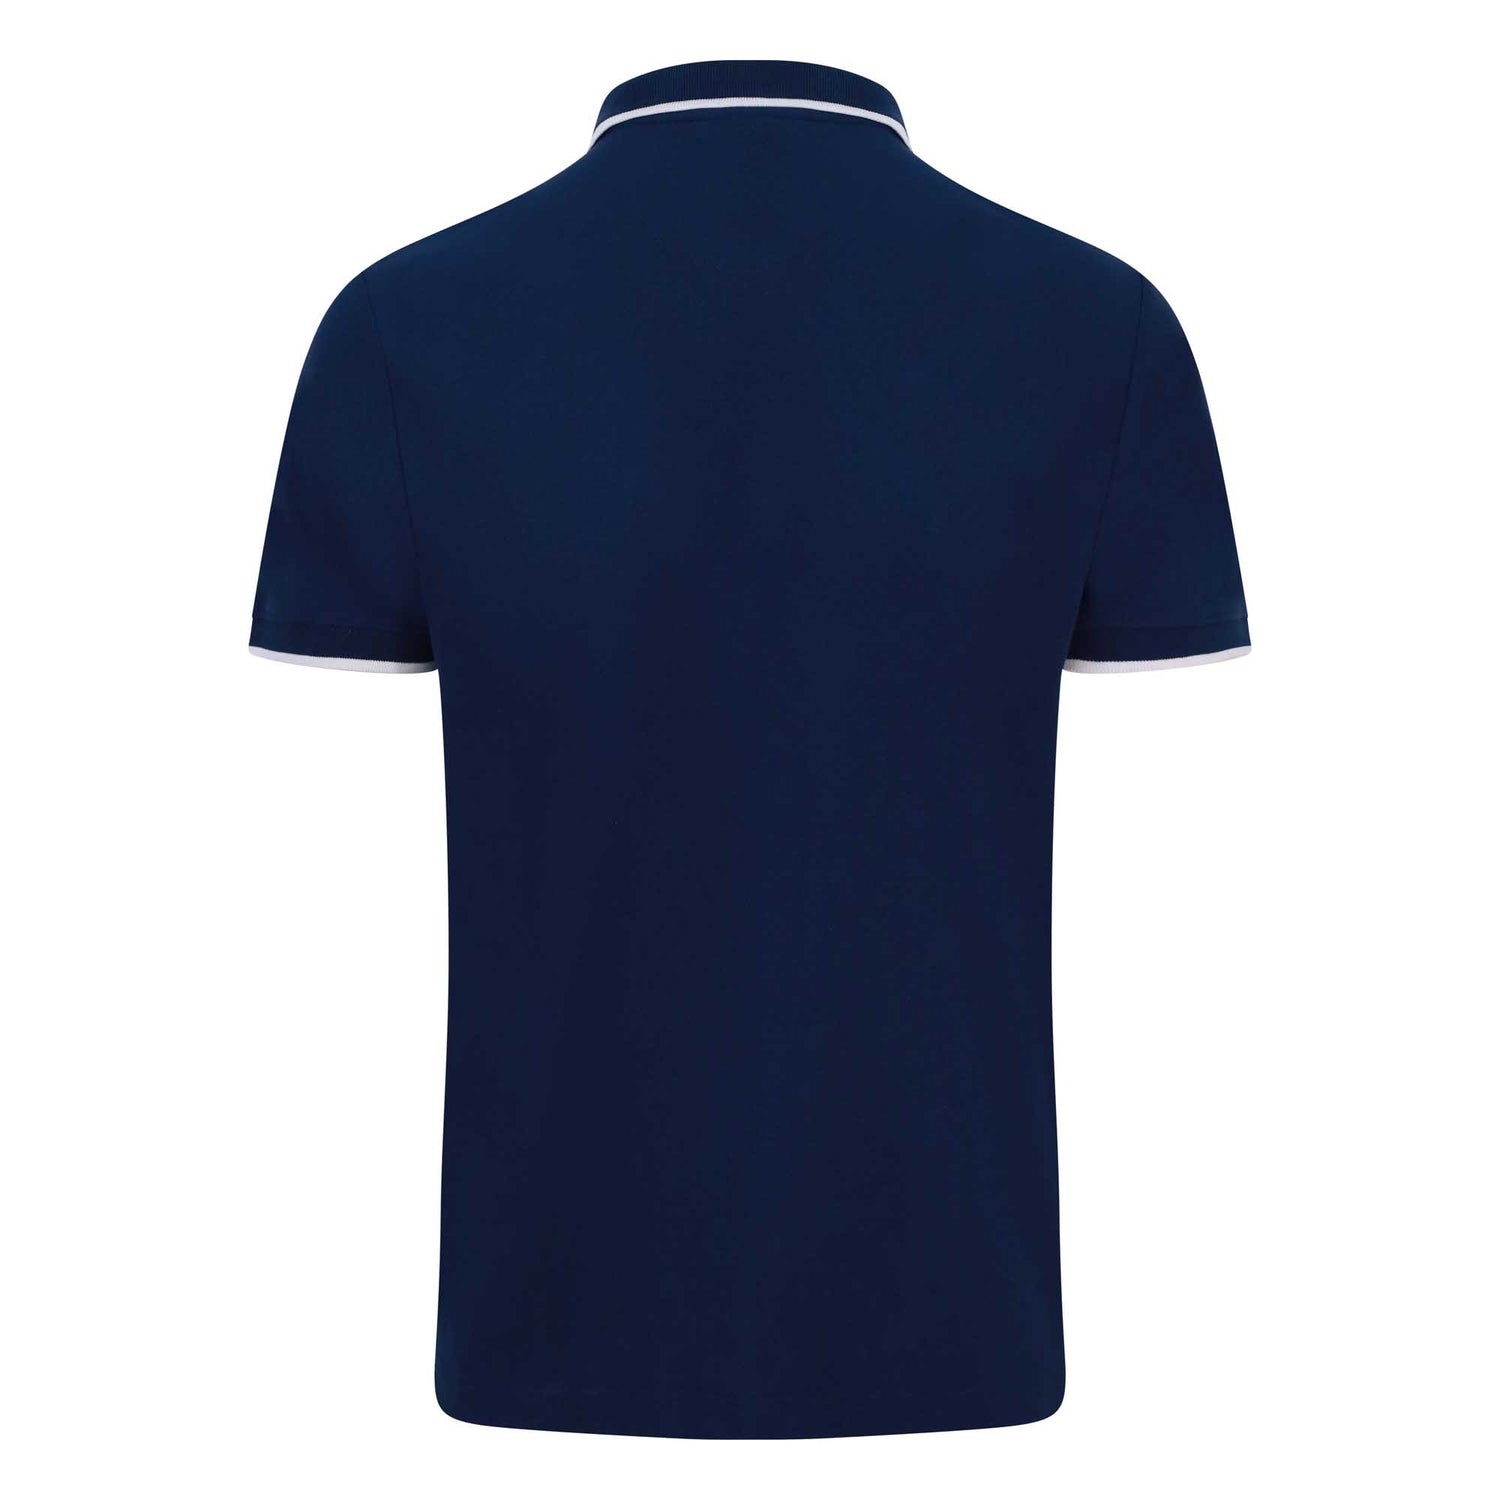 37th America's Cup Men's Tipped Polo – 37th Americas Cup Store